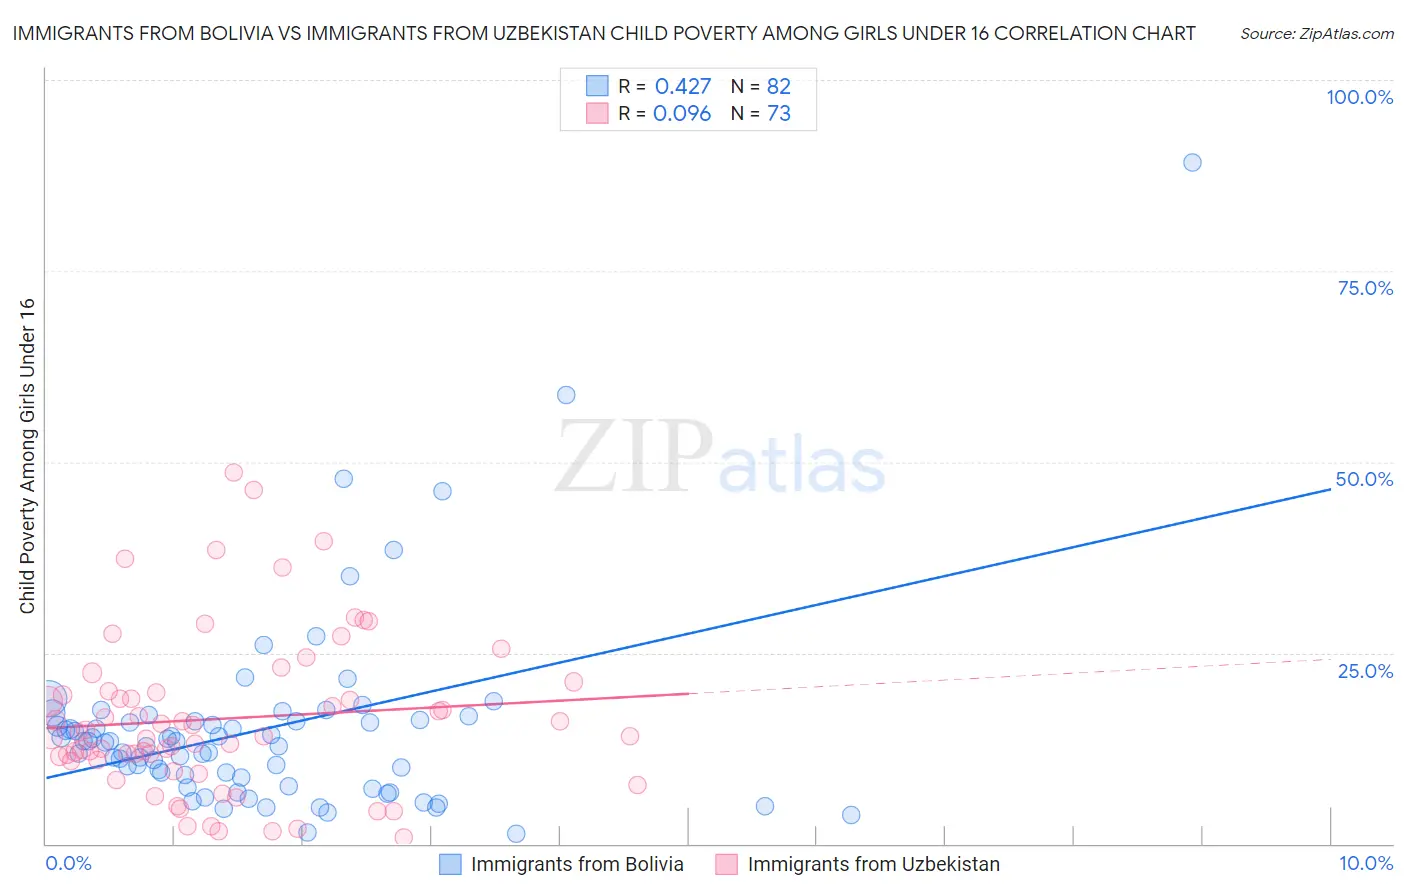 Immigrants from Bolivia vs Immigrants from Uzbekistan Child Poverty Among Girls Under 16